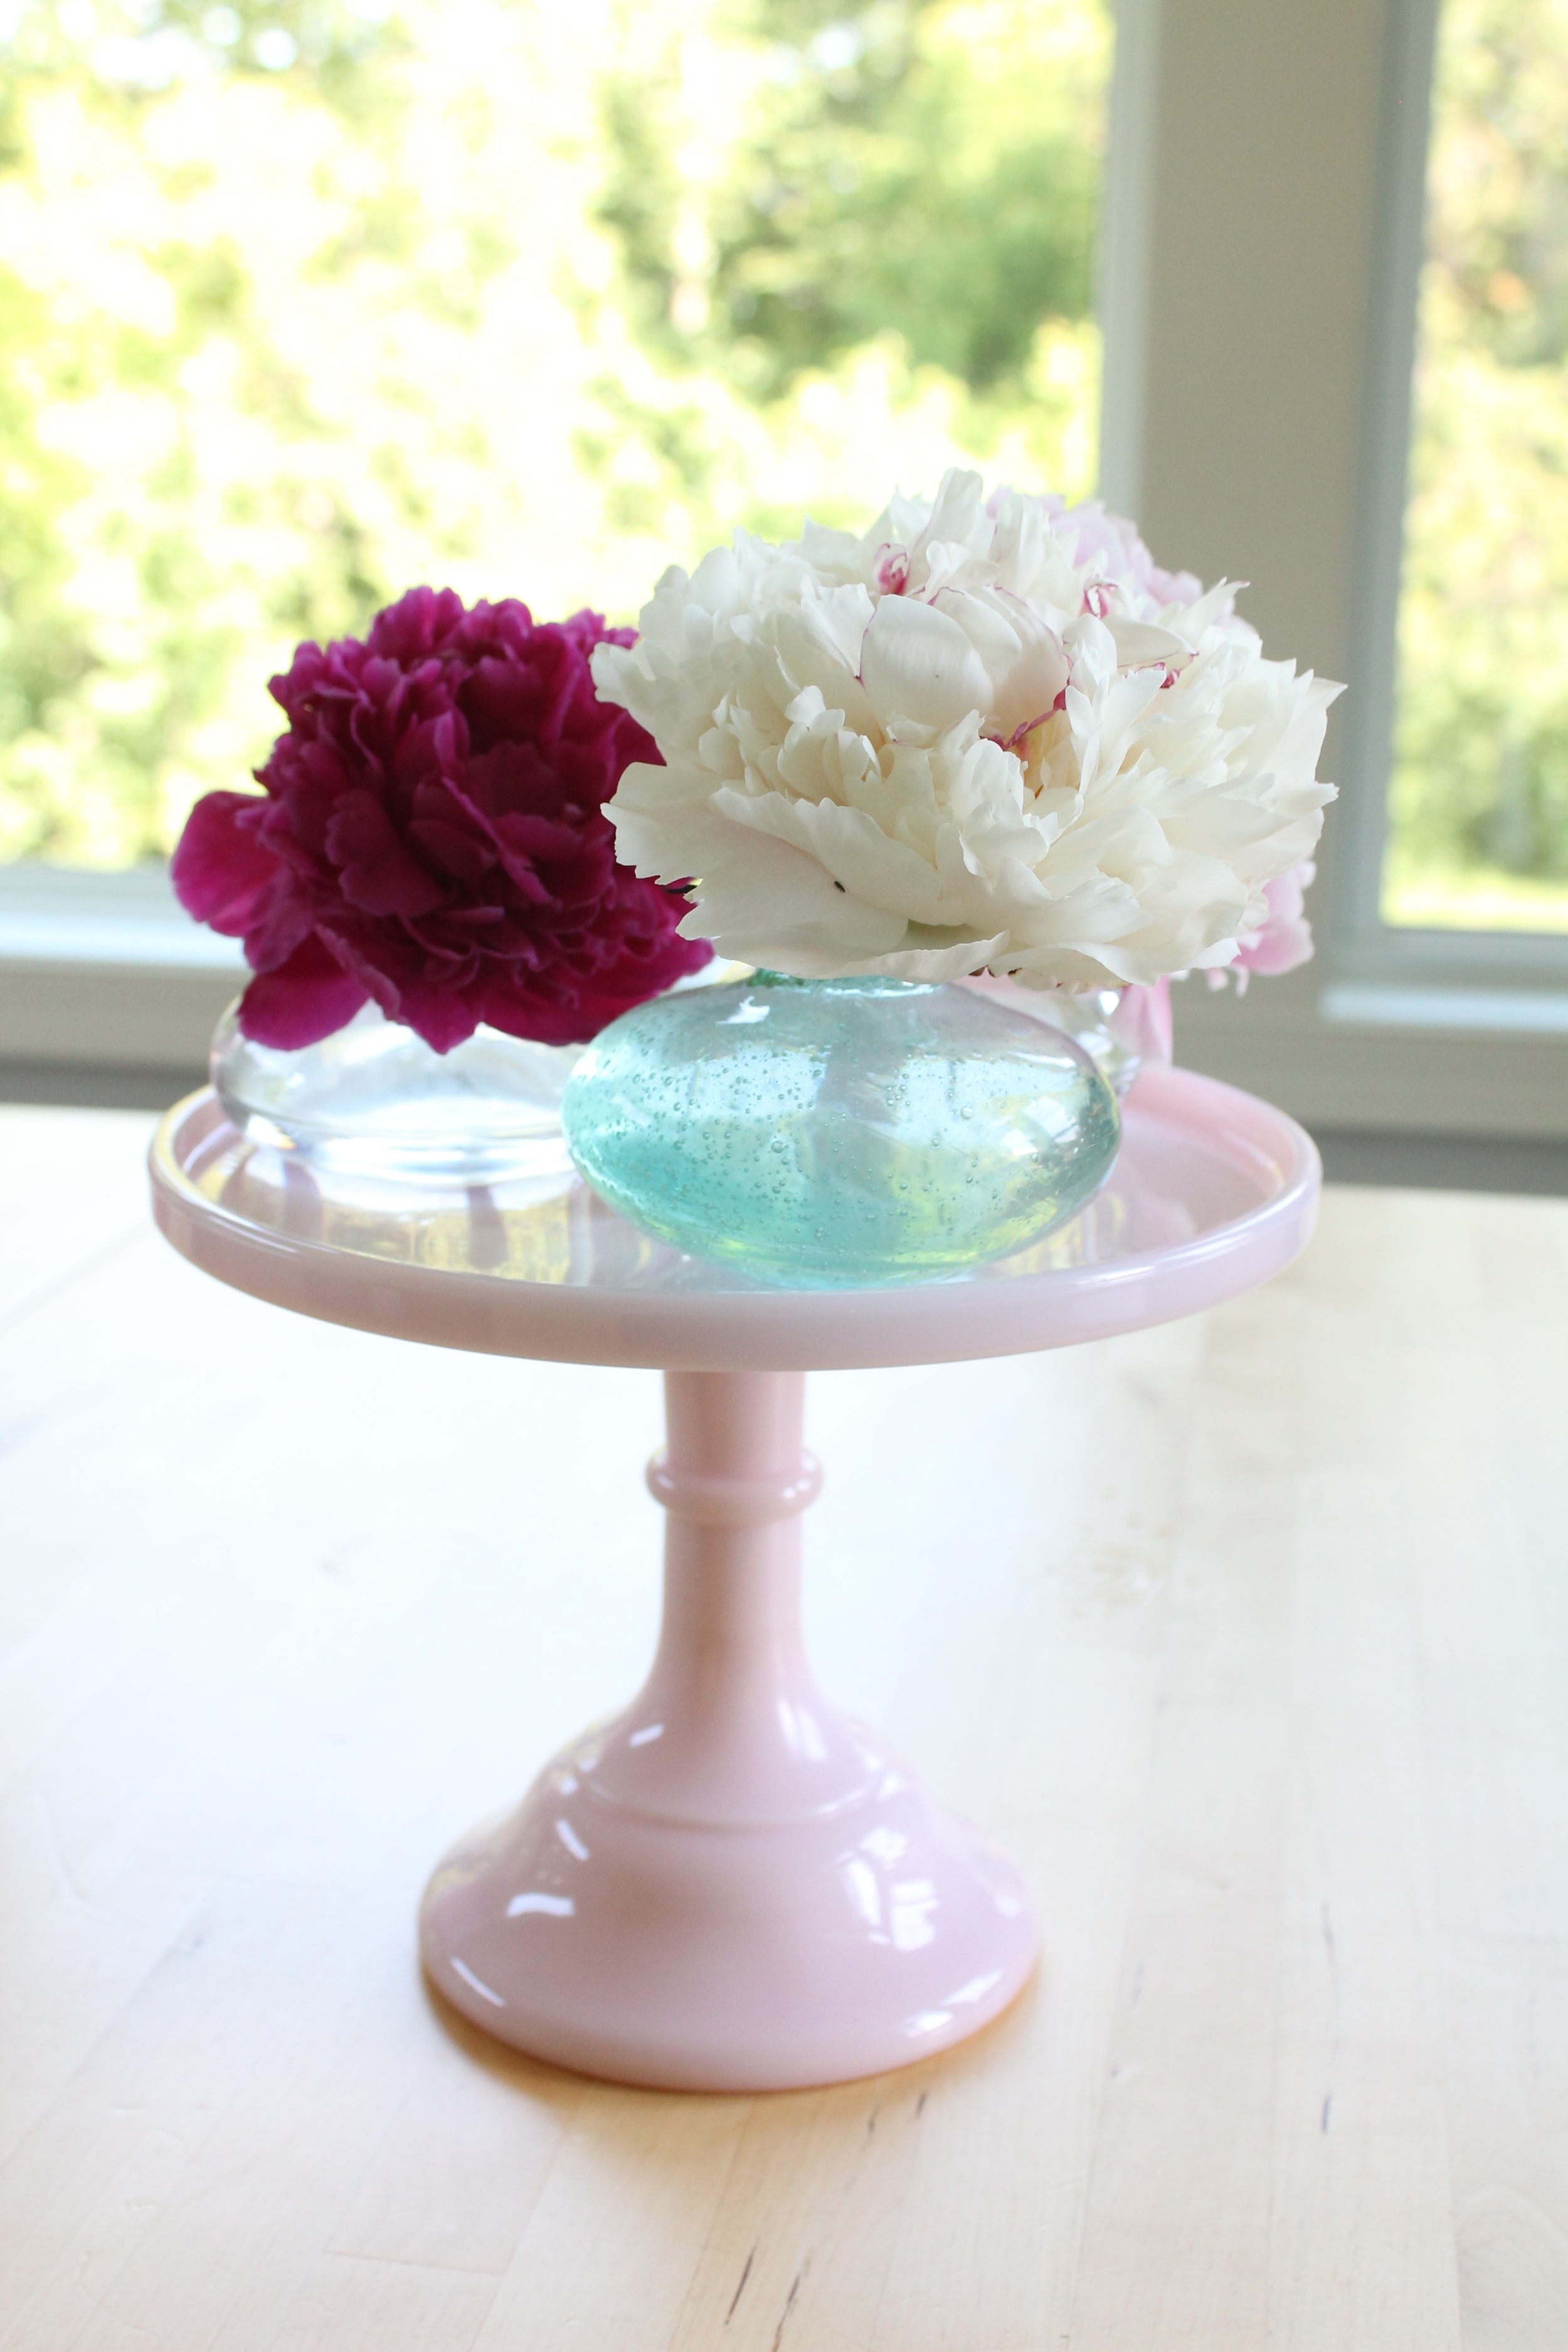 Peonies in bud vases on a pink cake plate.